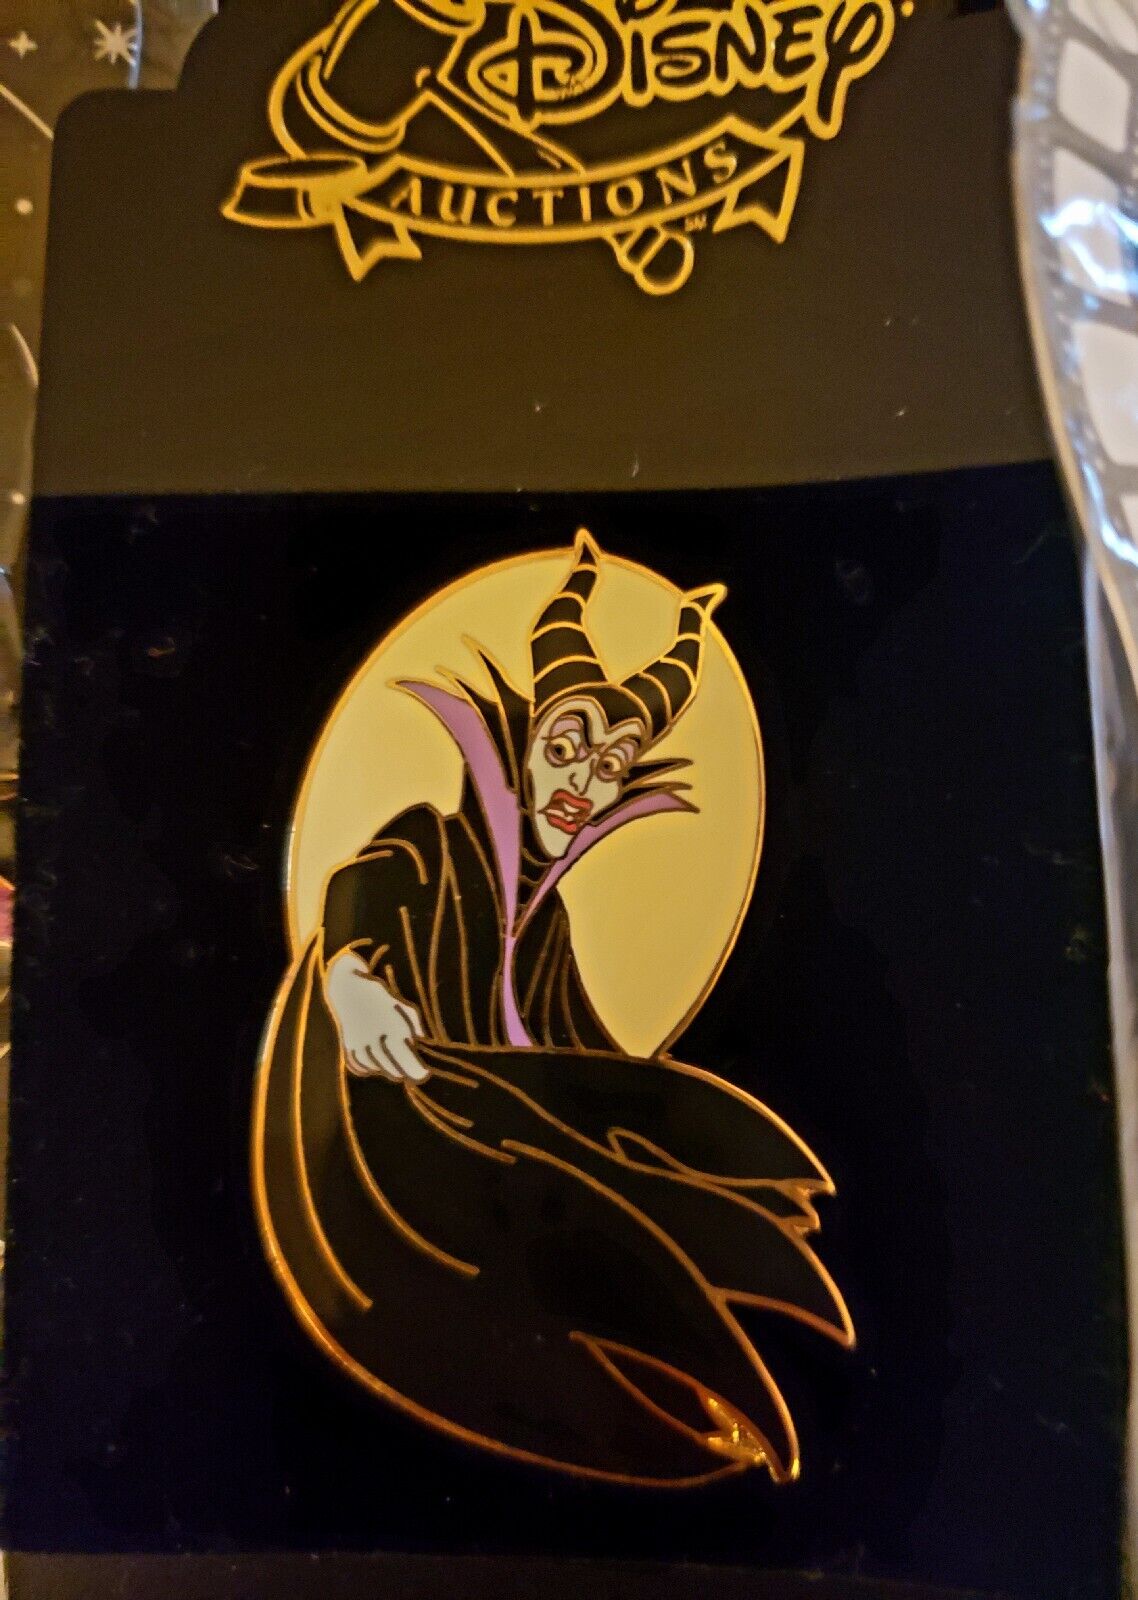 NOC Maleficent in Cape Against Moon Disney Auctions Pin #27730 Limited Ed 1000